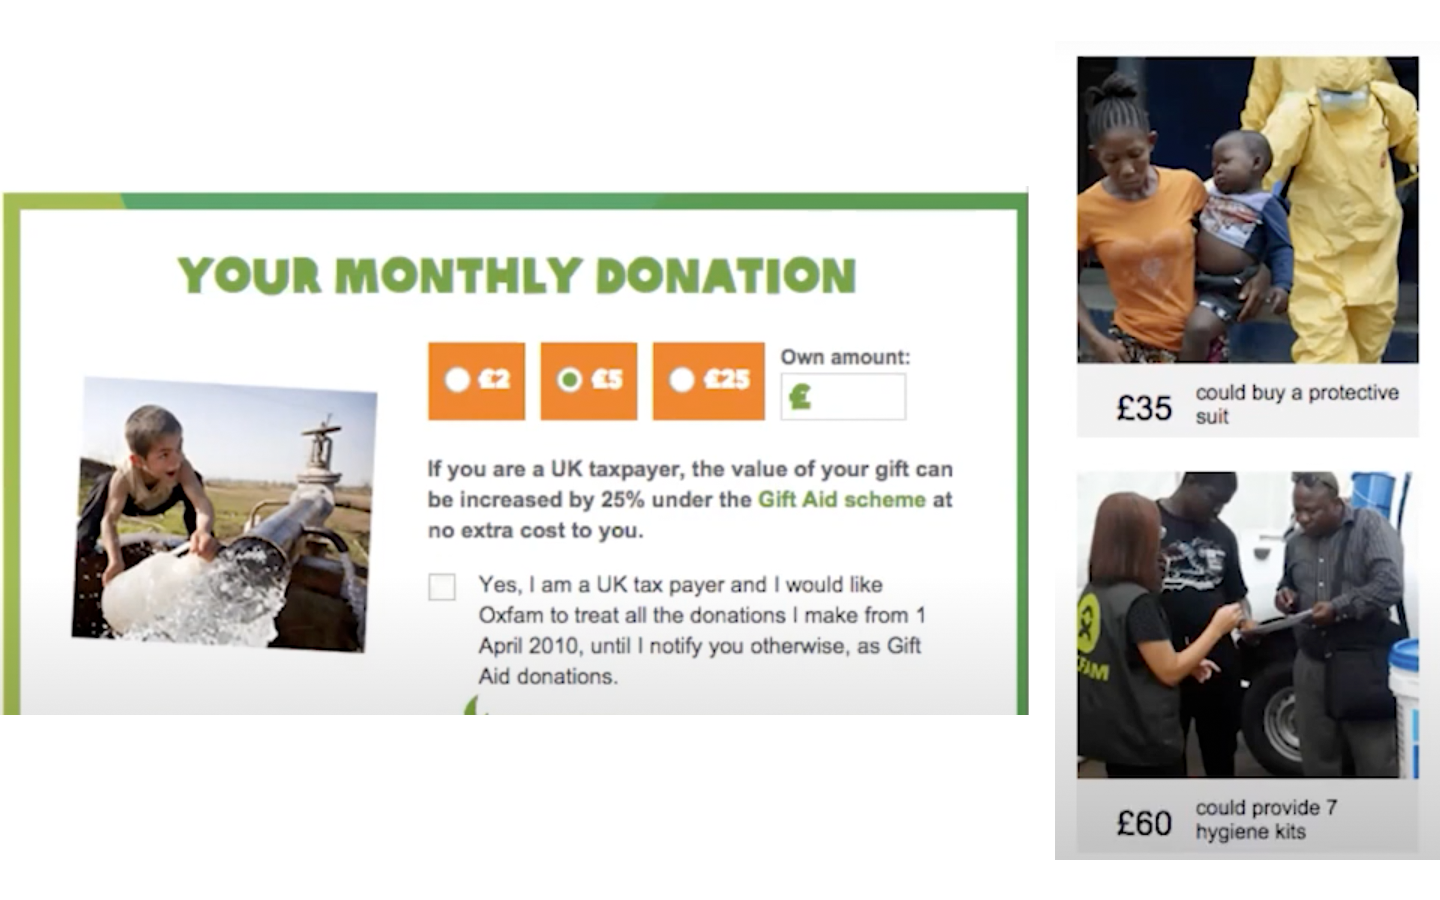 screenshots of charity websites. on the left a photo of a young boy where his eyeline is looking towards '£2, £5, £25'. On the right, two photos of people looking down at '£35' and '£60'.